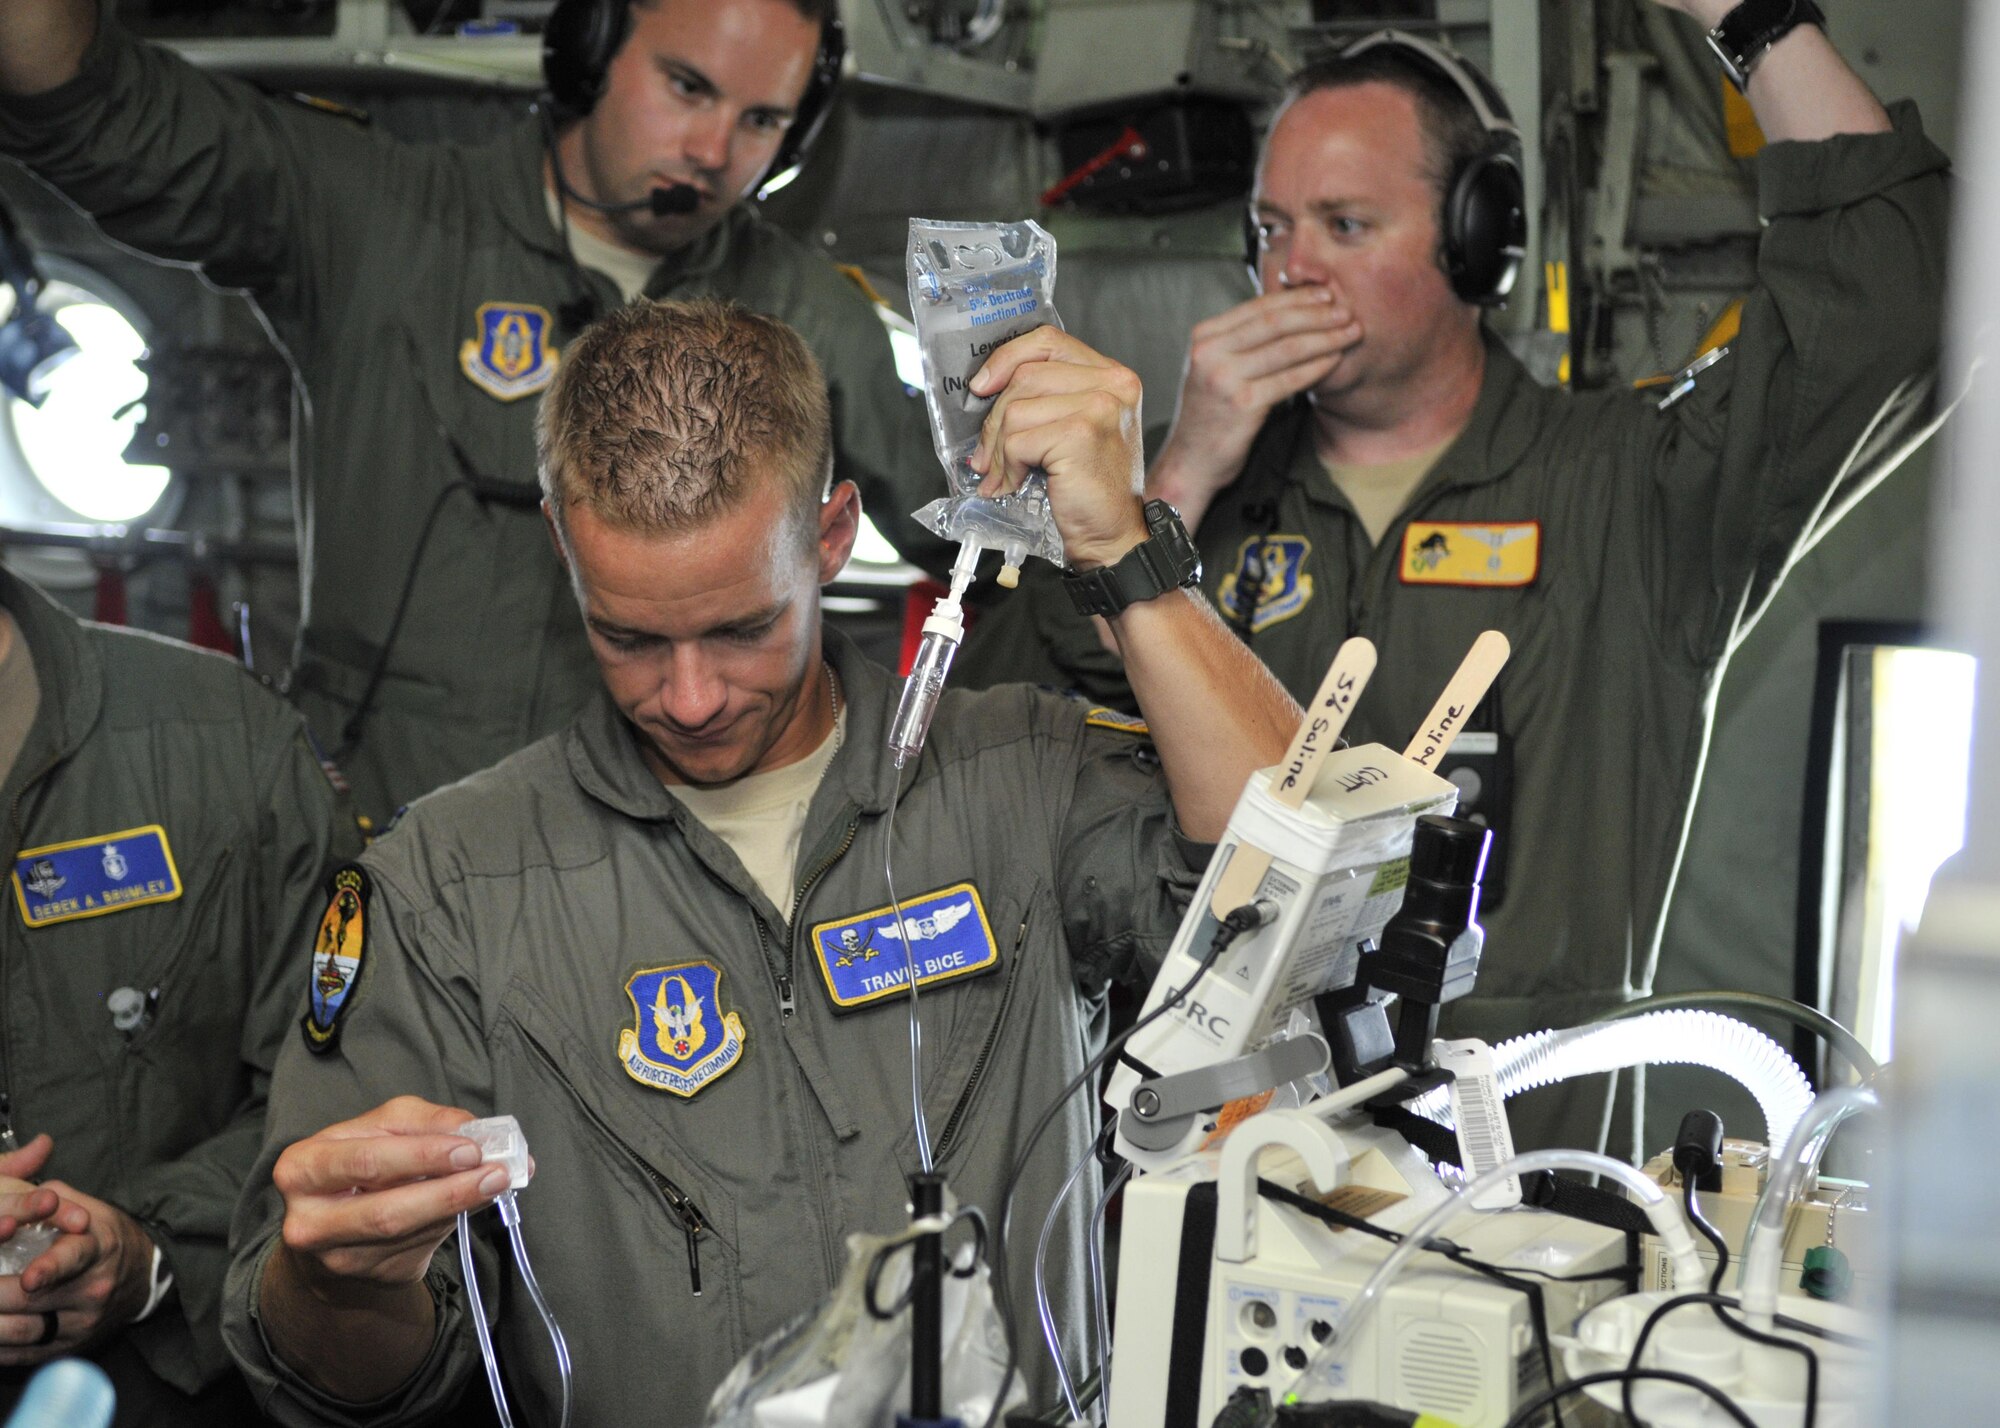 Capt. Travis Bice, 920th Rescue Wing aeromedical staging squadron critical care flight nurse, prepares an IV to treat a patient on a C-130/H rescue aircraft during MEDBEACH 2015 joint service exercise at Patrick Air Force Base, Fla., July 11, 2015. This exercise prepares military medical personnel for deployments by providing realistic scenarios that they may see during a wartime situation. (U.S. Air Force photo by Tech. Sgt. Michael Means)